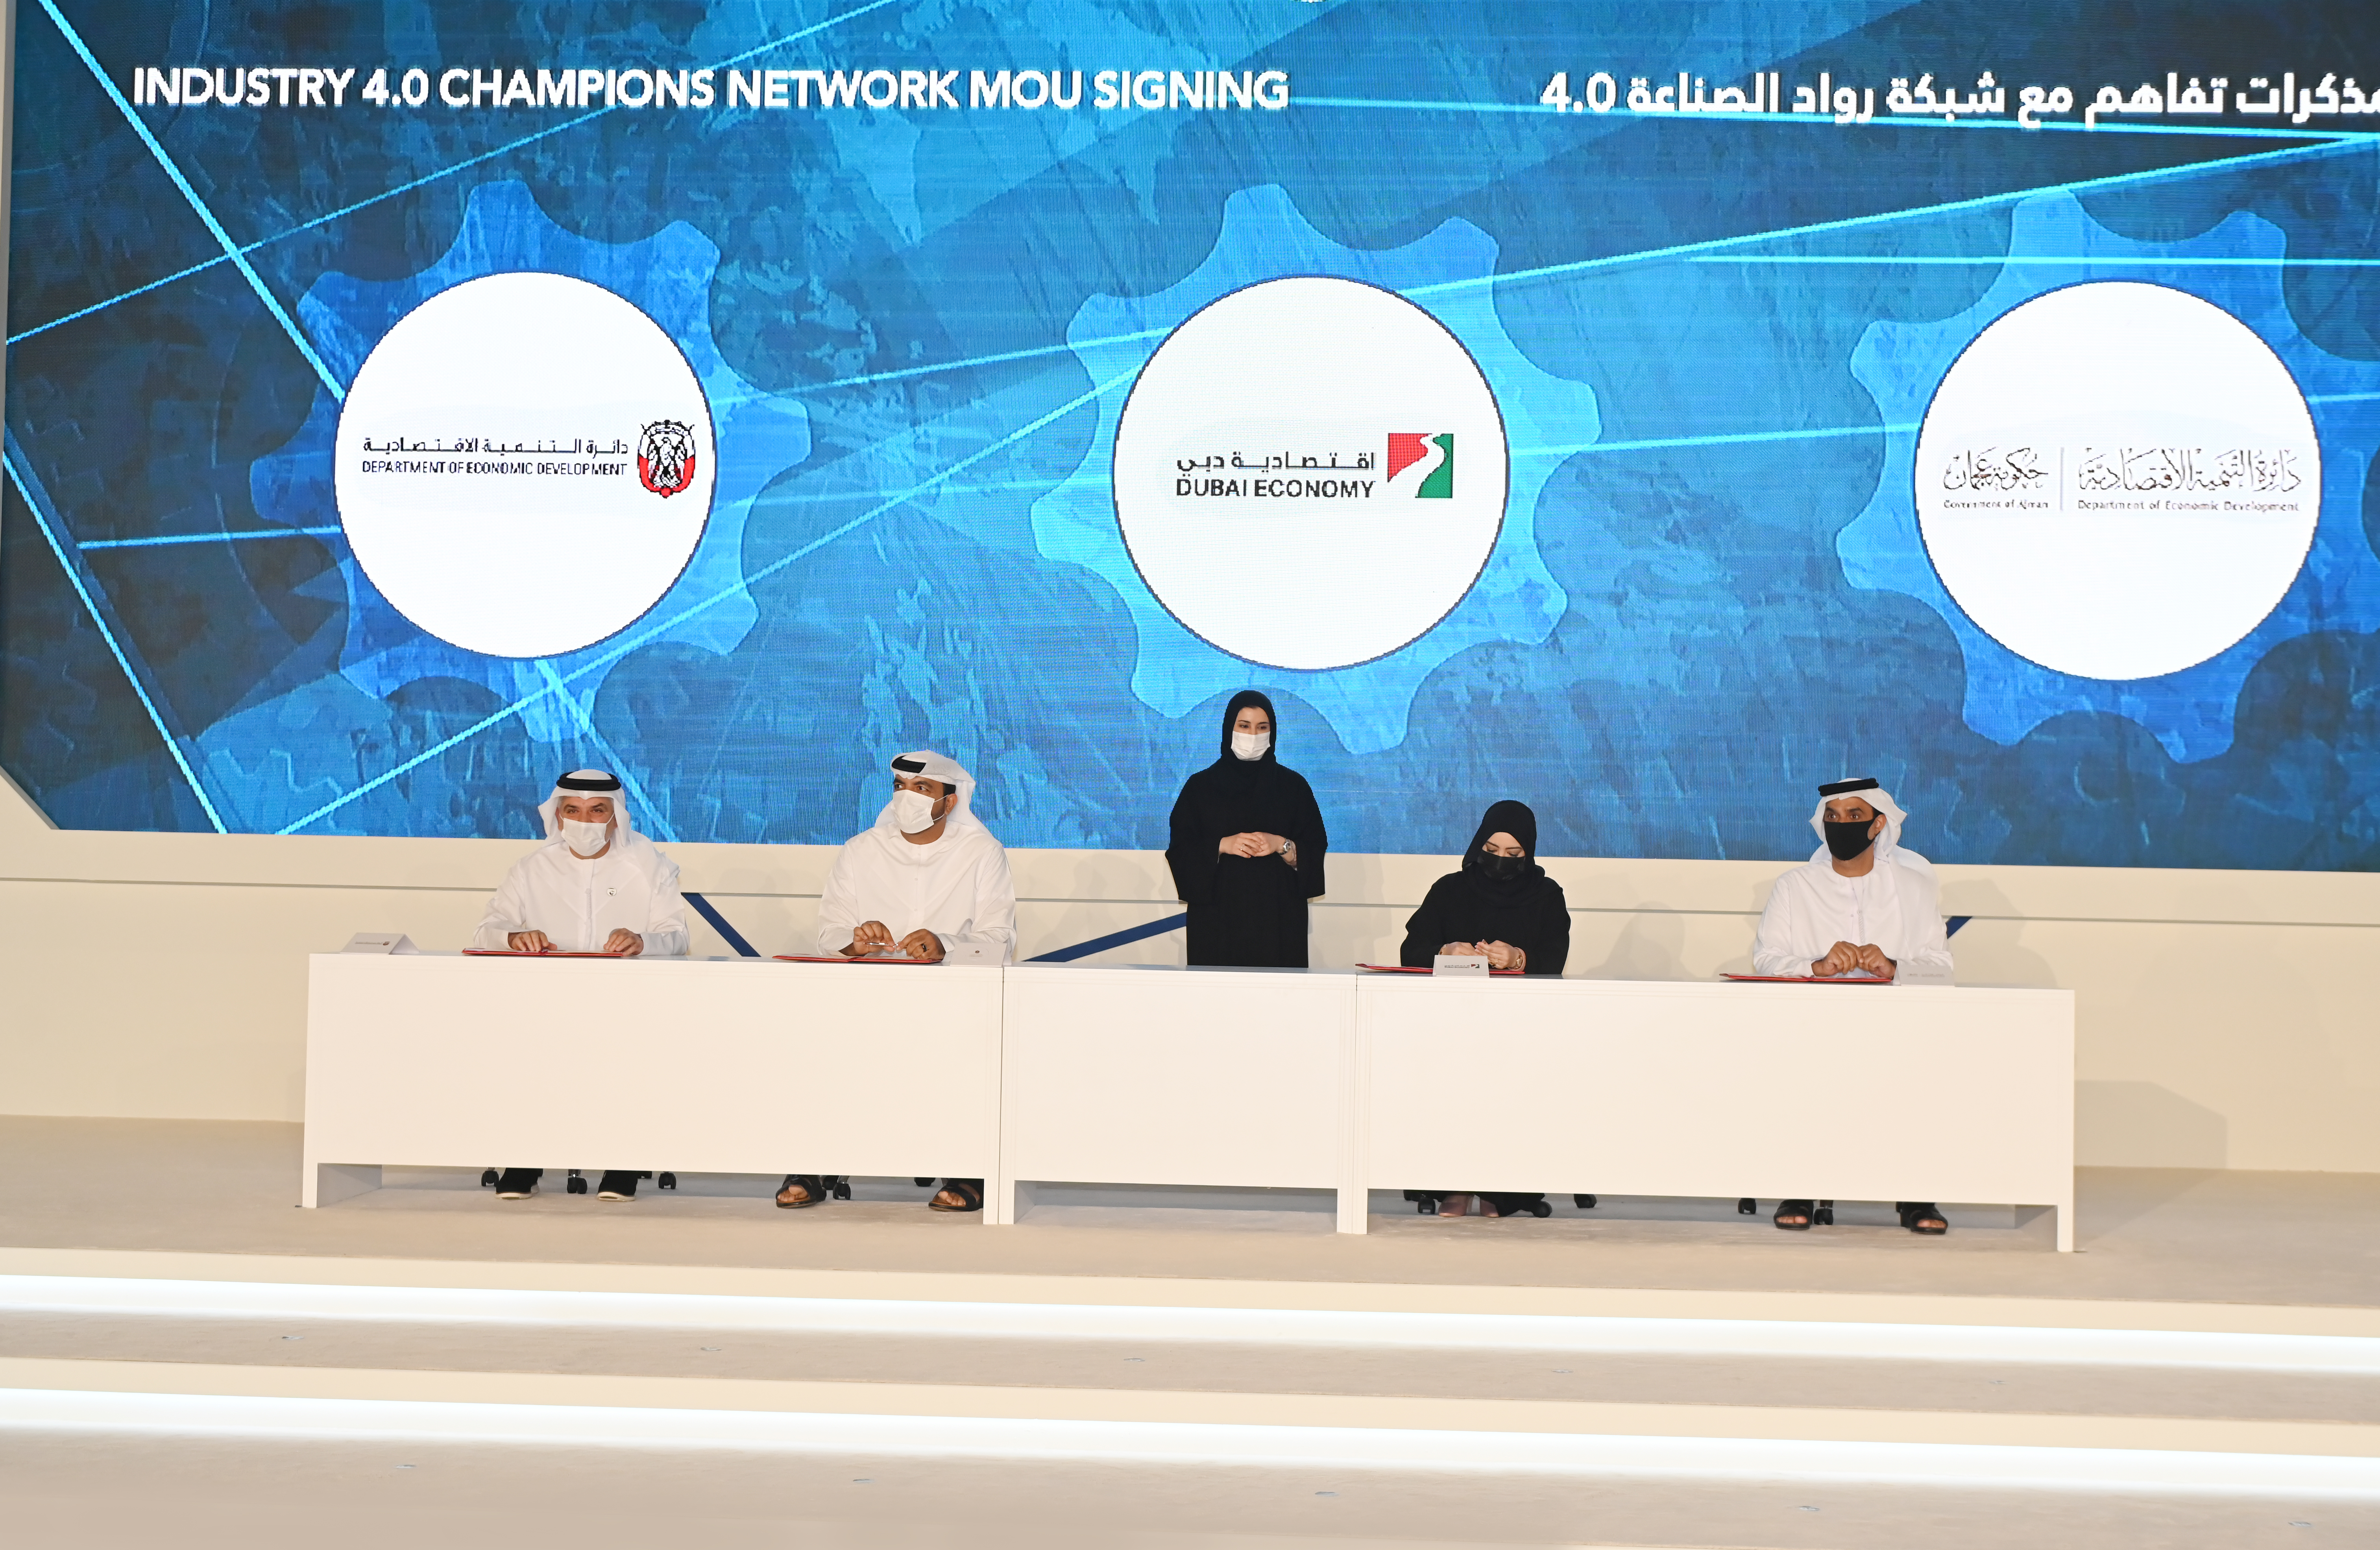 MoIAT signs MoUs with 12 Industry Champions, Departments of Economic Development for Abu Dhabi, Dubai and Ajman to kick-start 4IR programme